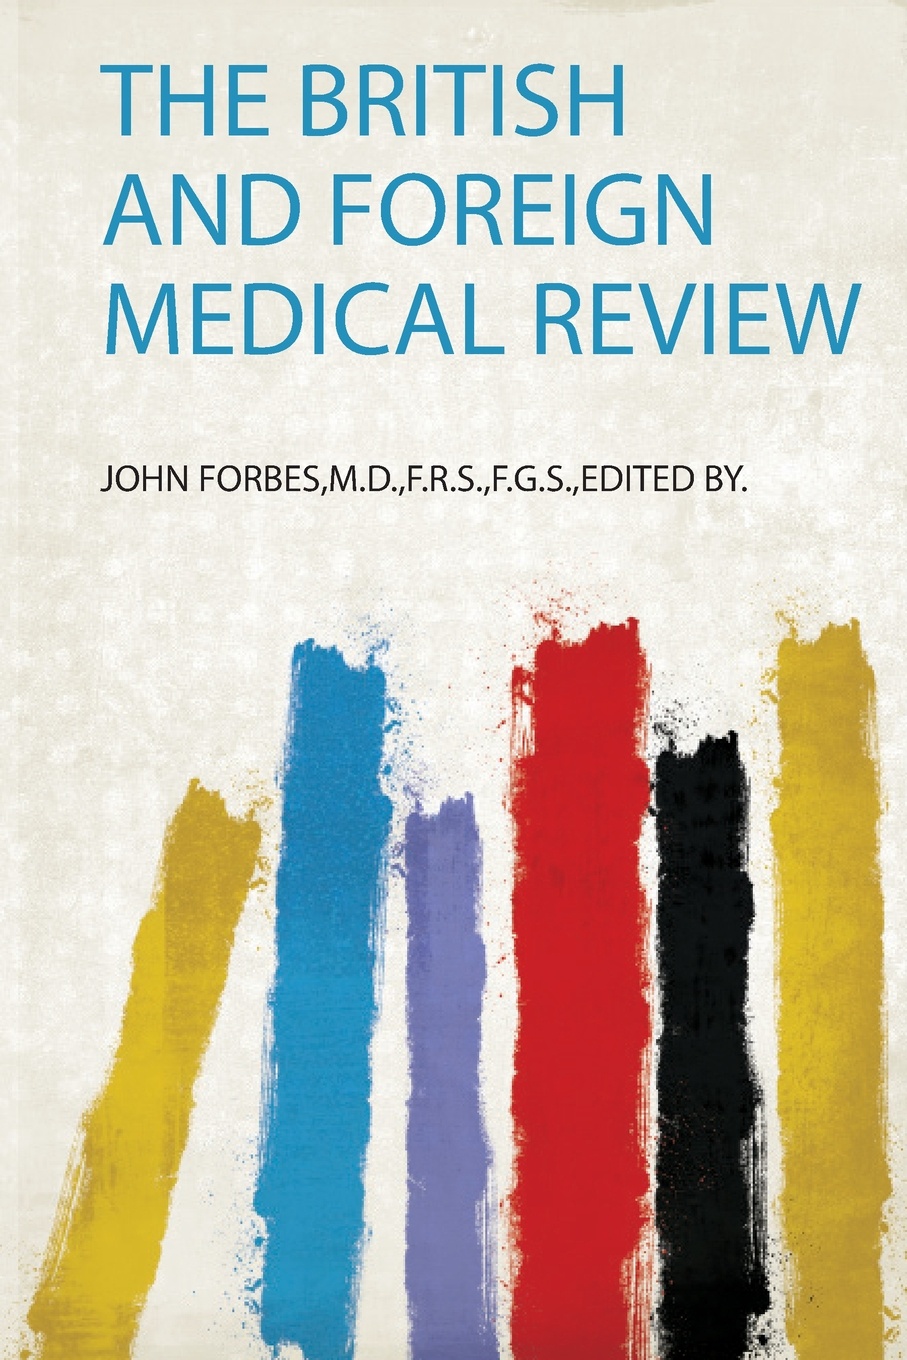 The British and Foreign Medical Review